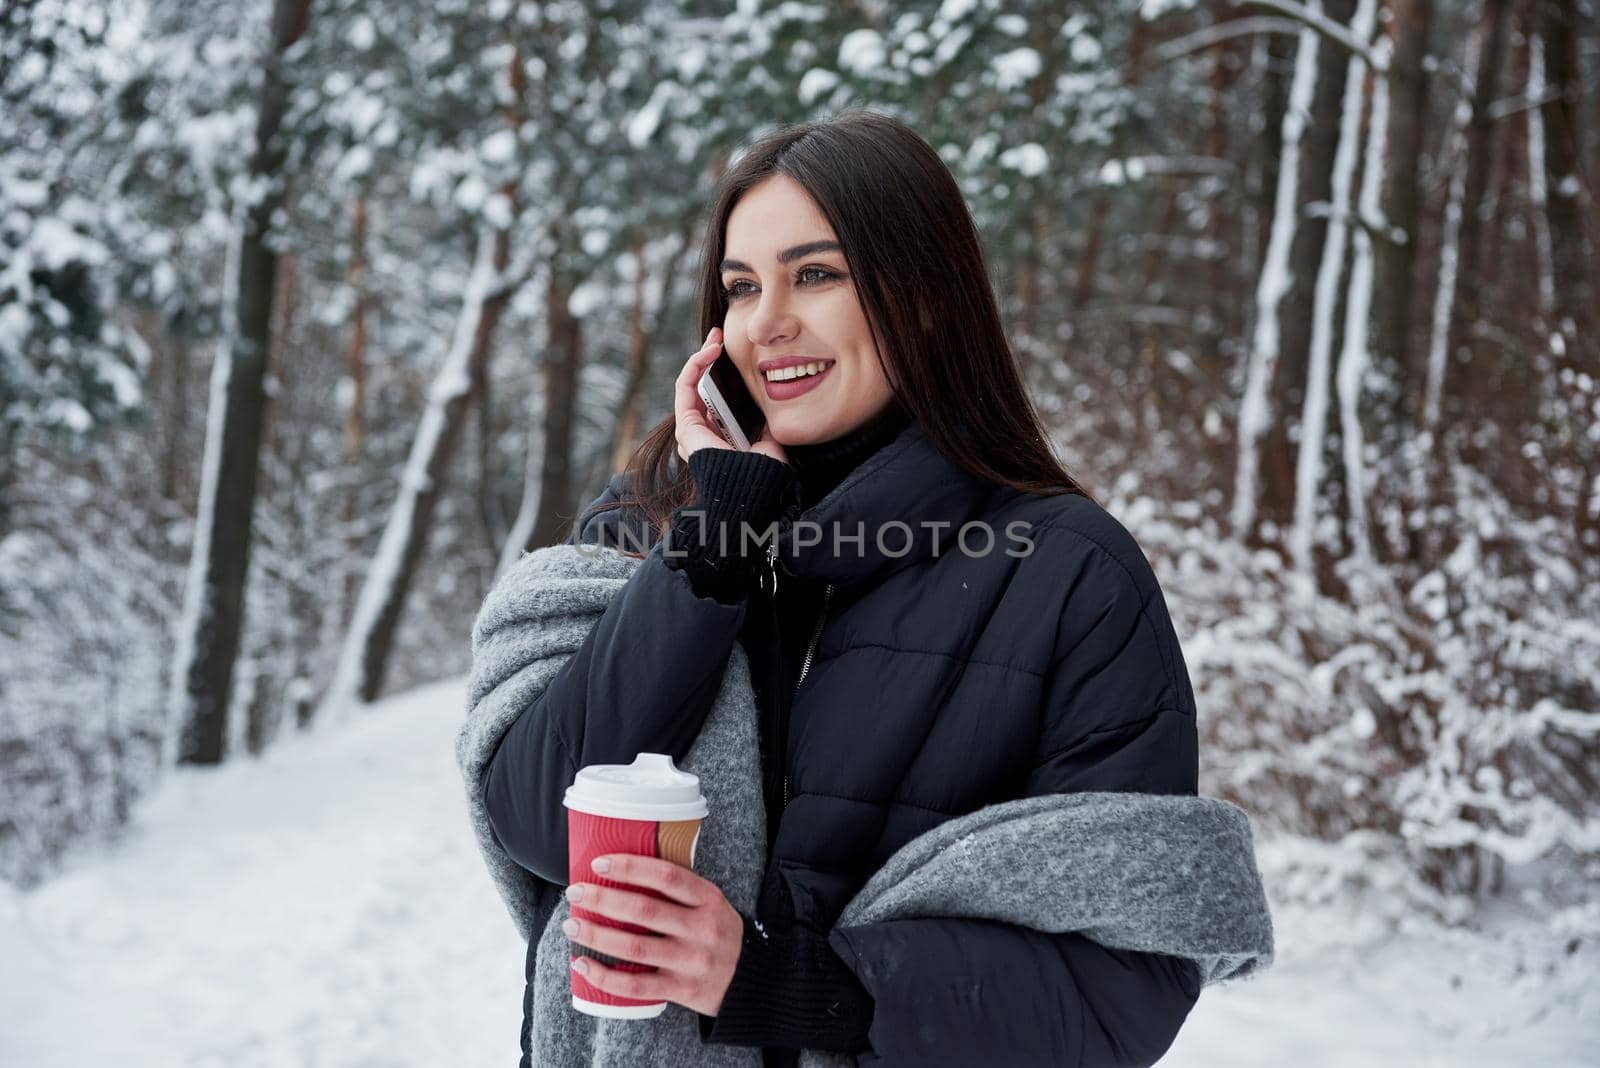 Calling to the friend. Girl in warm clothes with cup of coffee have a walk in the winter forest.